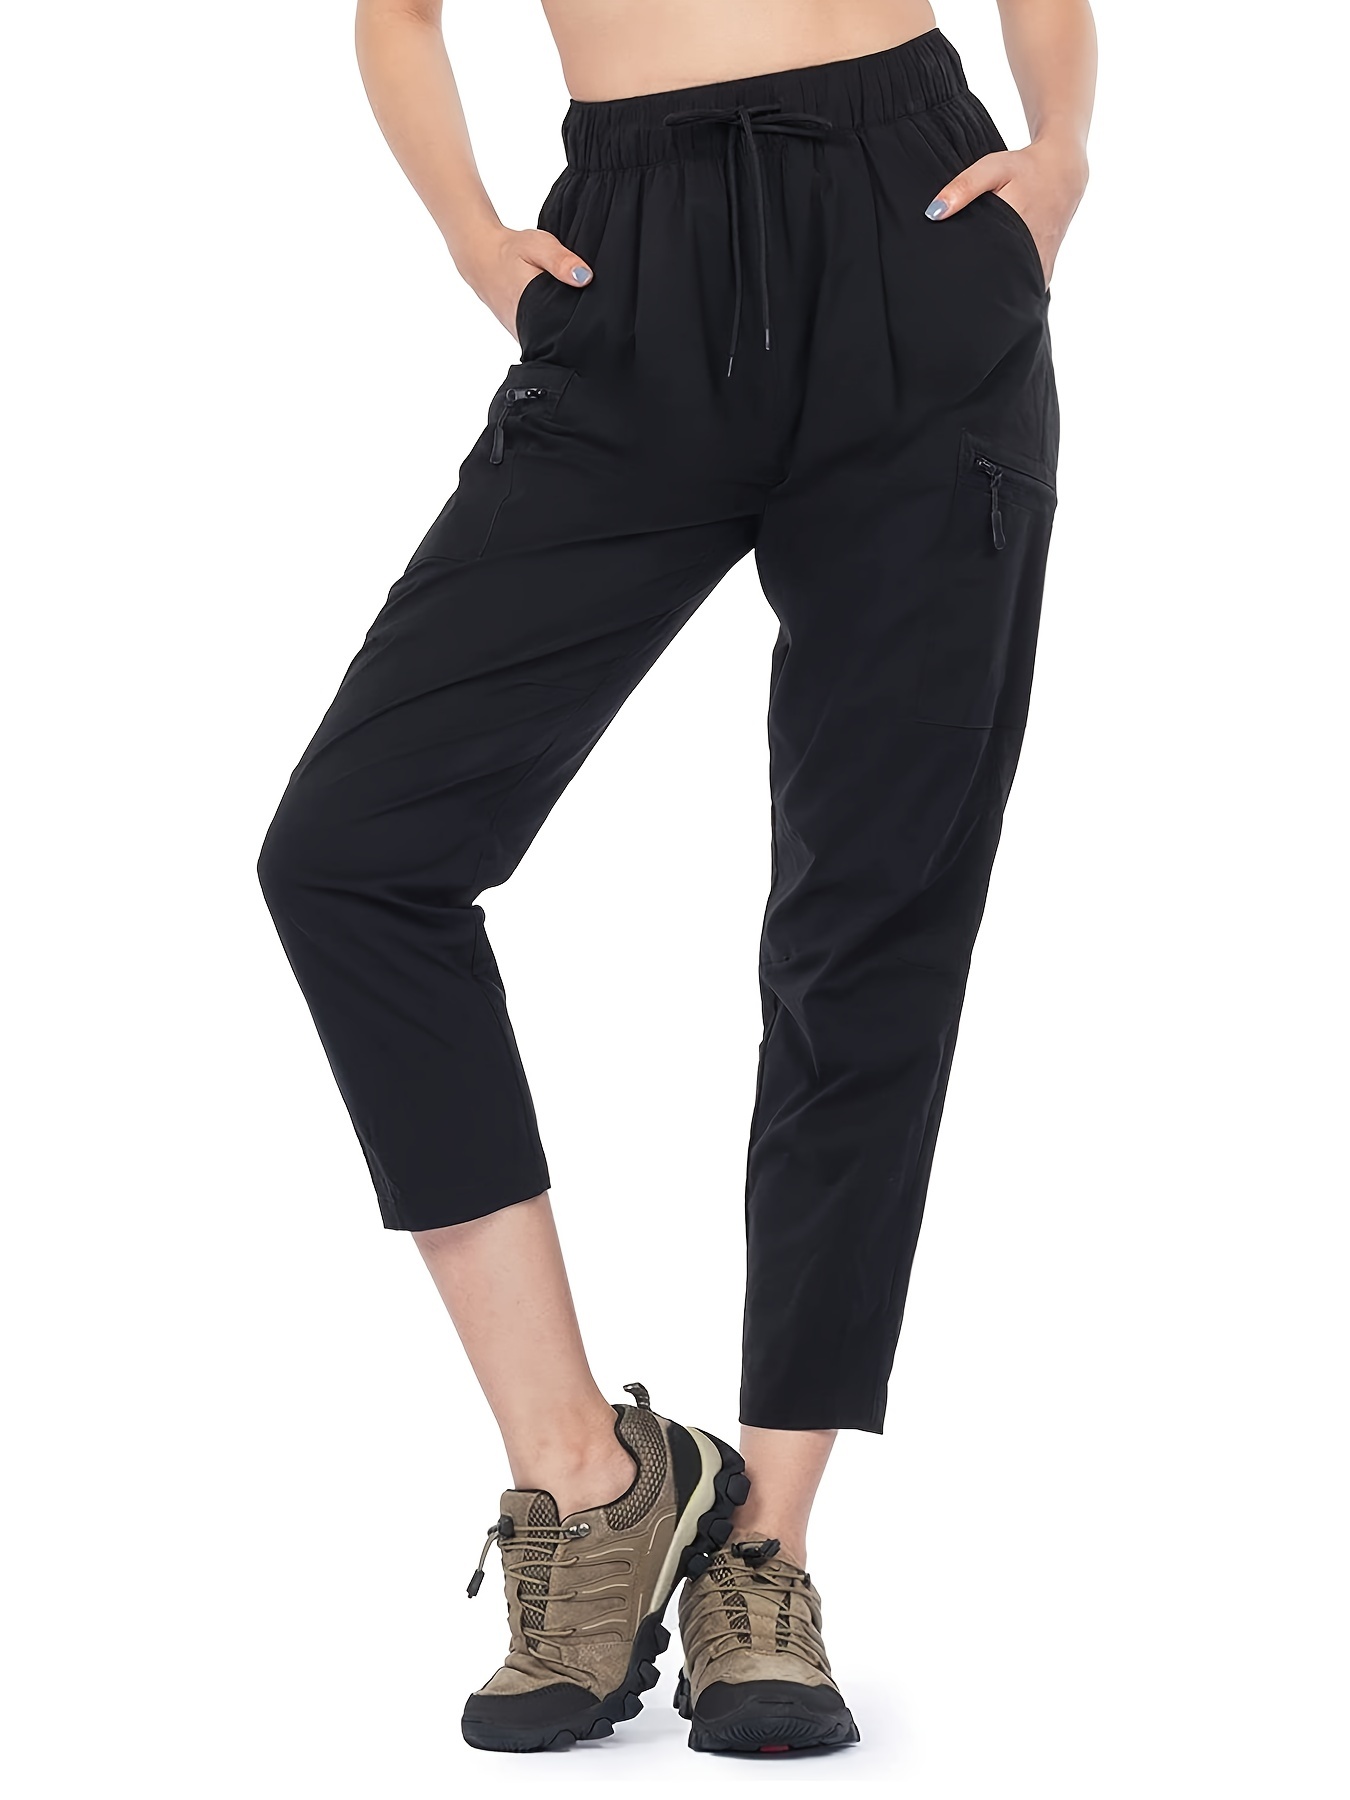 Zpanxa Women's Cargo Pants Trousers Lightweight Hiking Pants Quick Dry  Athletic Workout Pants for Outdoor Travel Casual Capris Work Wear Combat  Safety Cargo 6 Pocket Full Pants Black M 